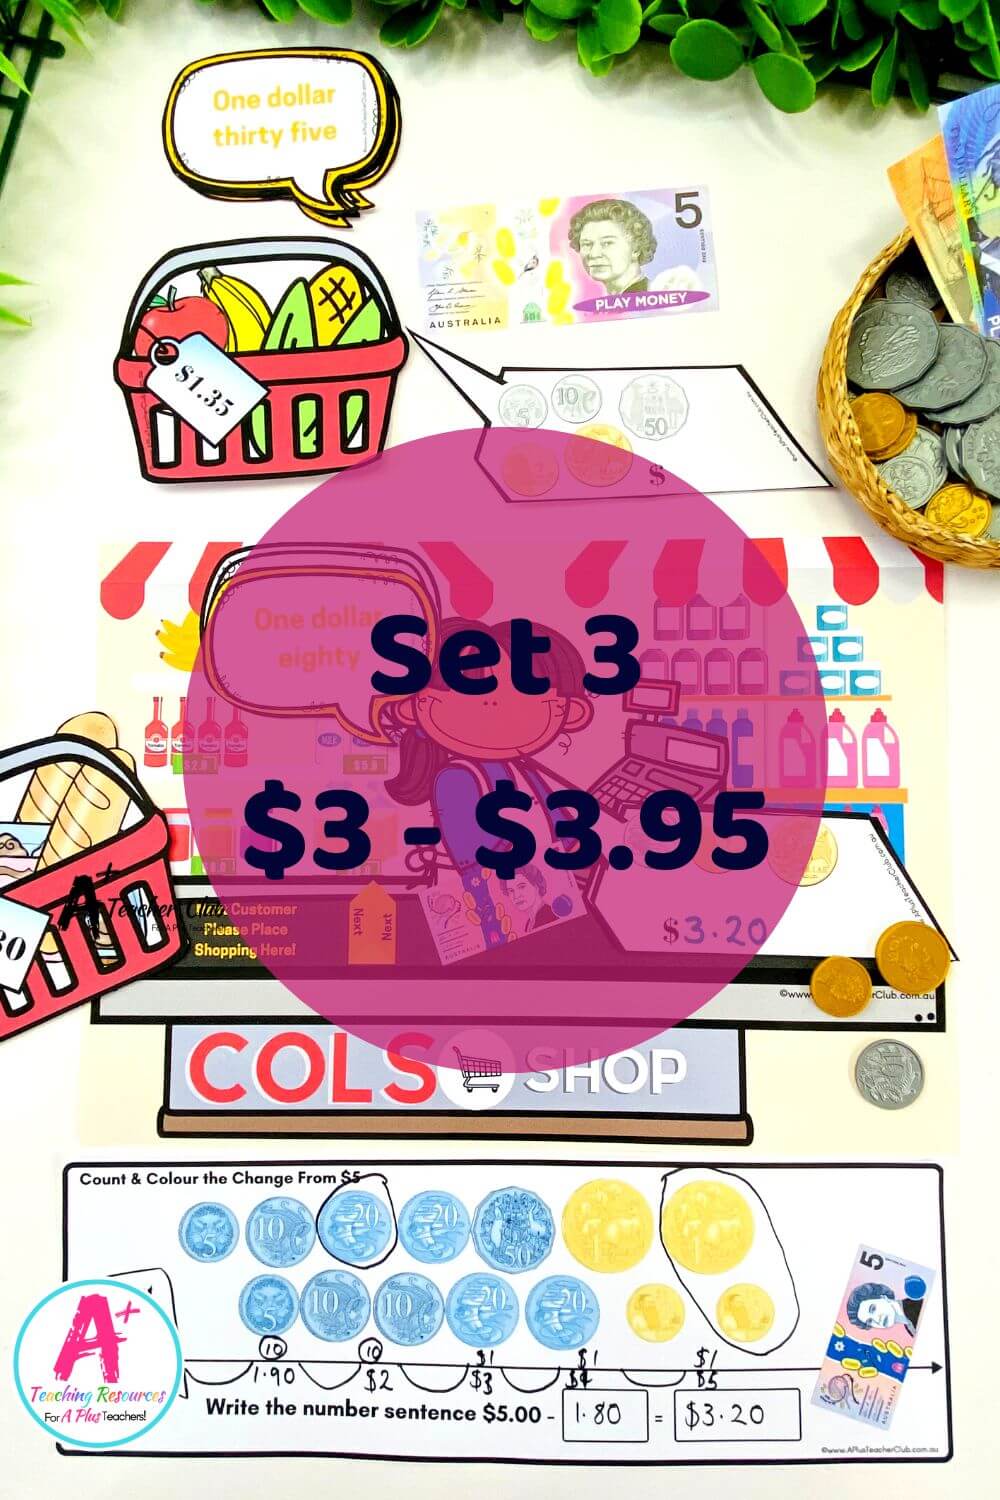 Counting Change Games - COLS Set 3 ($3-$3.95)